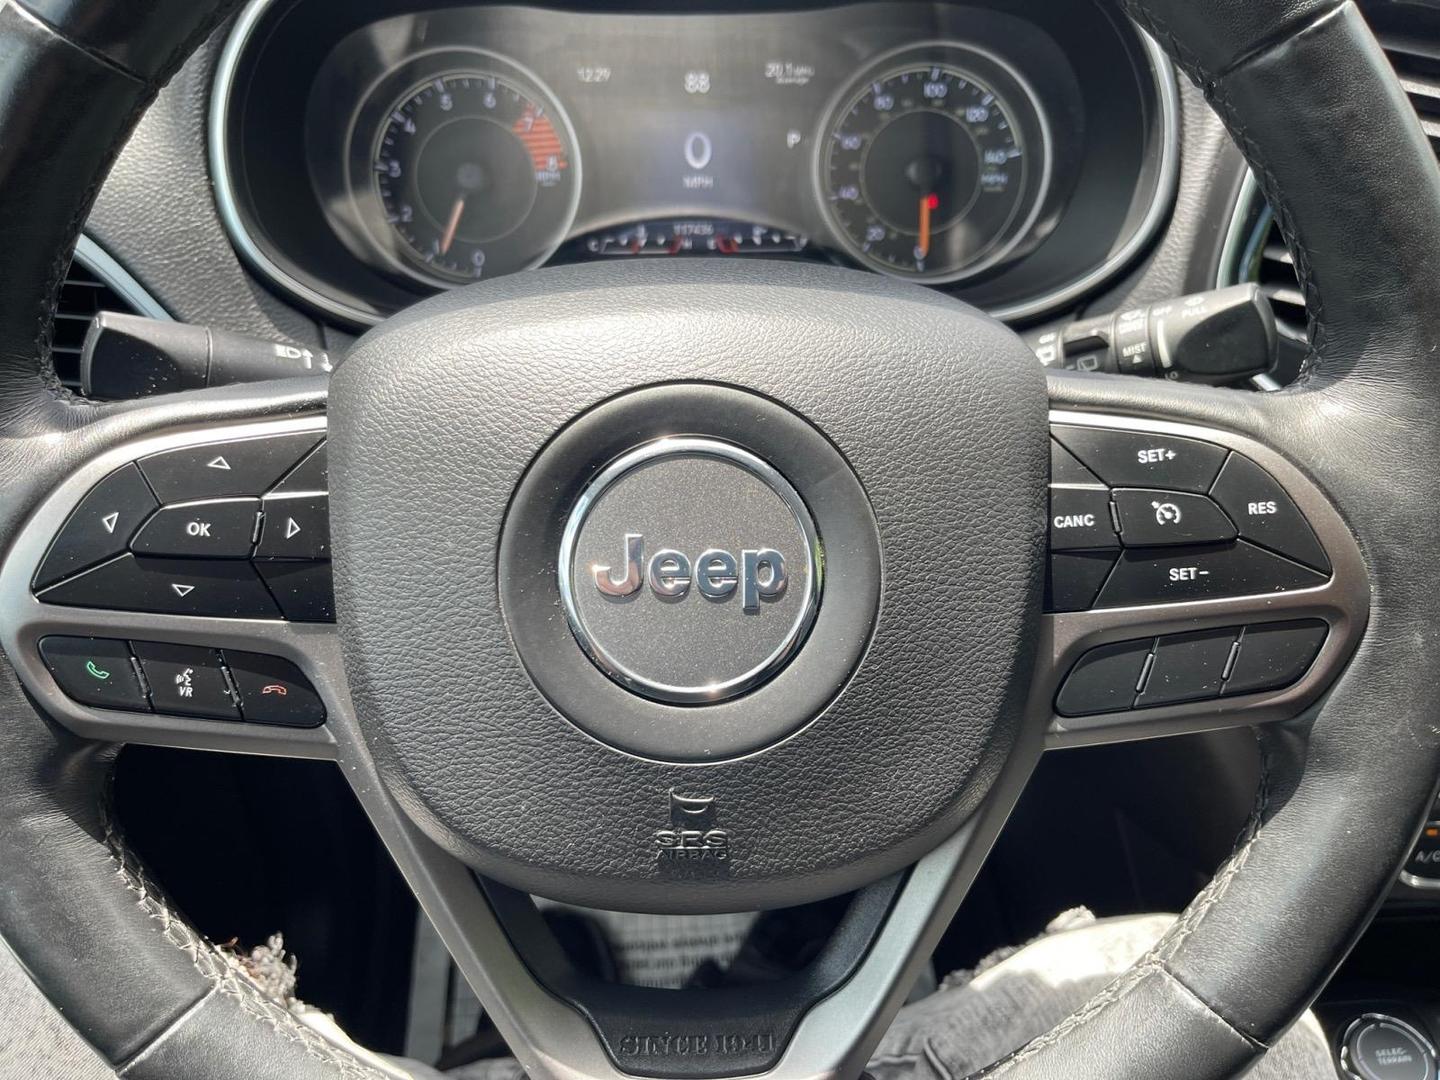 2019 Jeep Cherokee Utility 4d Limited 4wd 3.2l V6 - Image 21